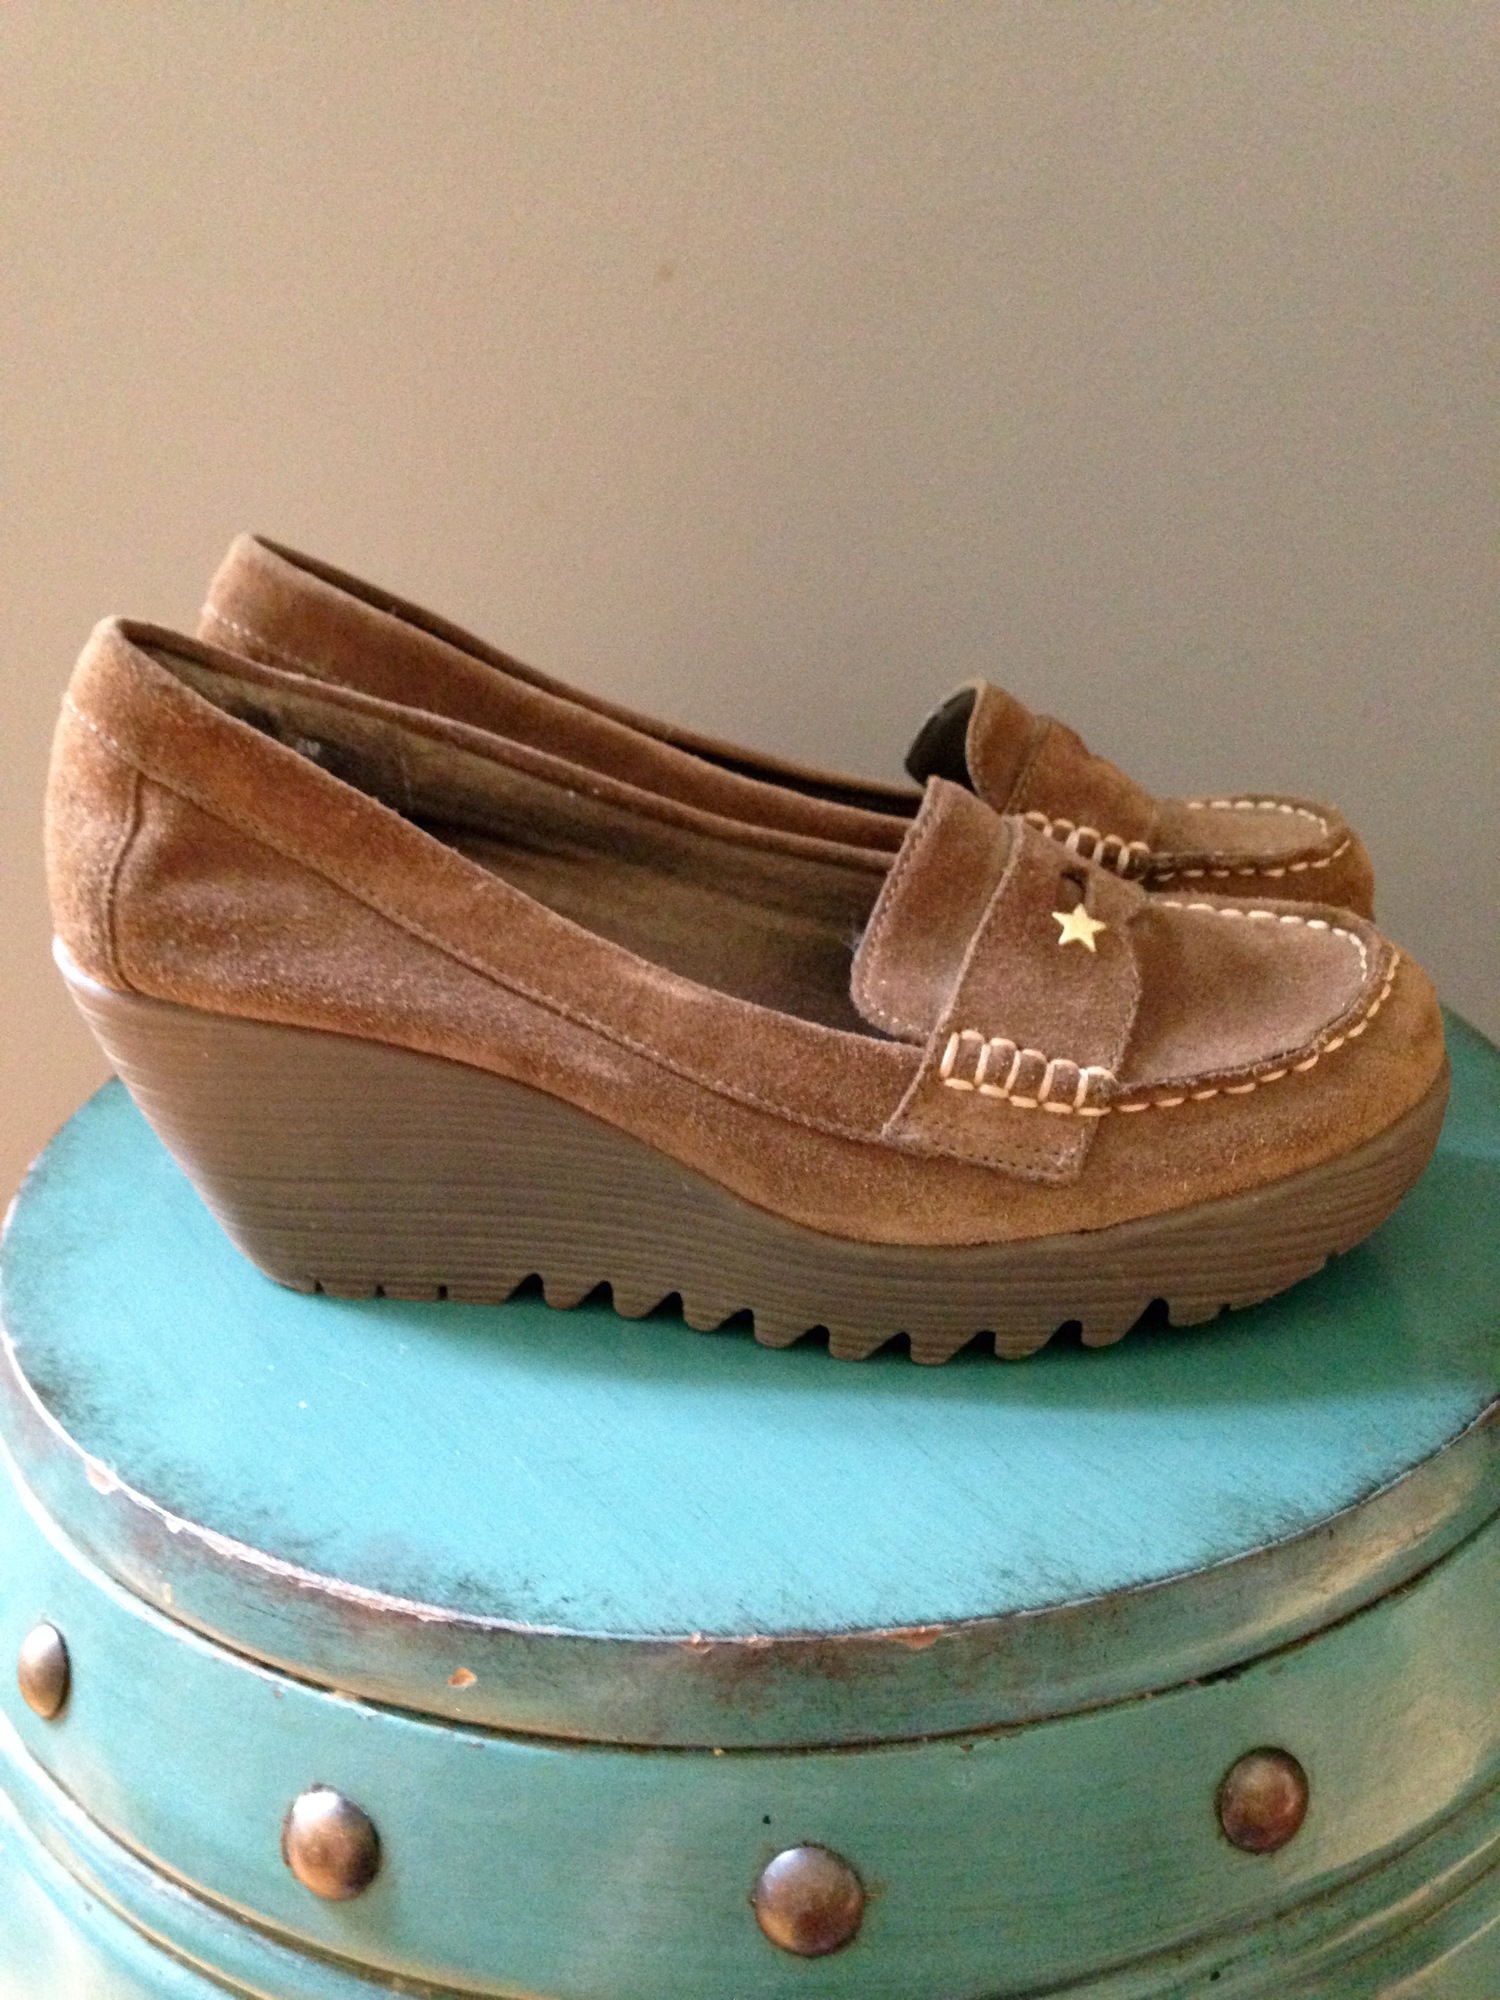 green stitched suede loafers $26 - shoes - bright lights big pretty